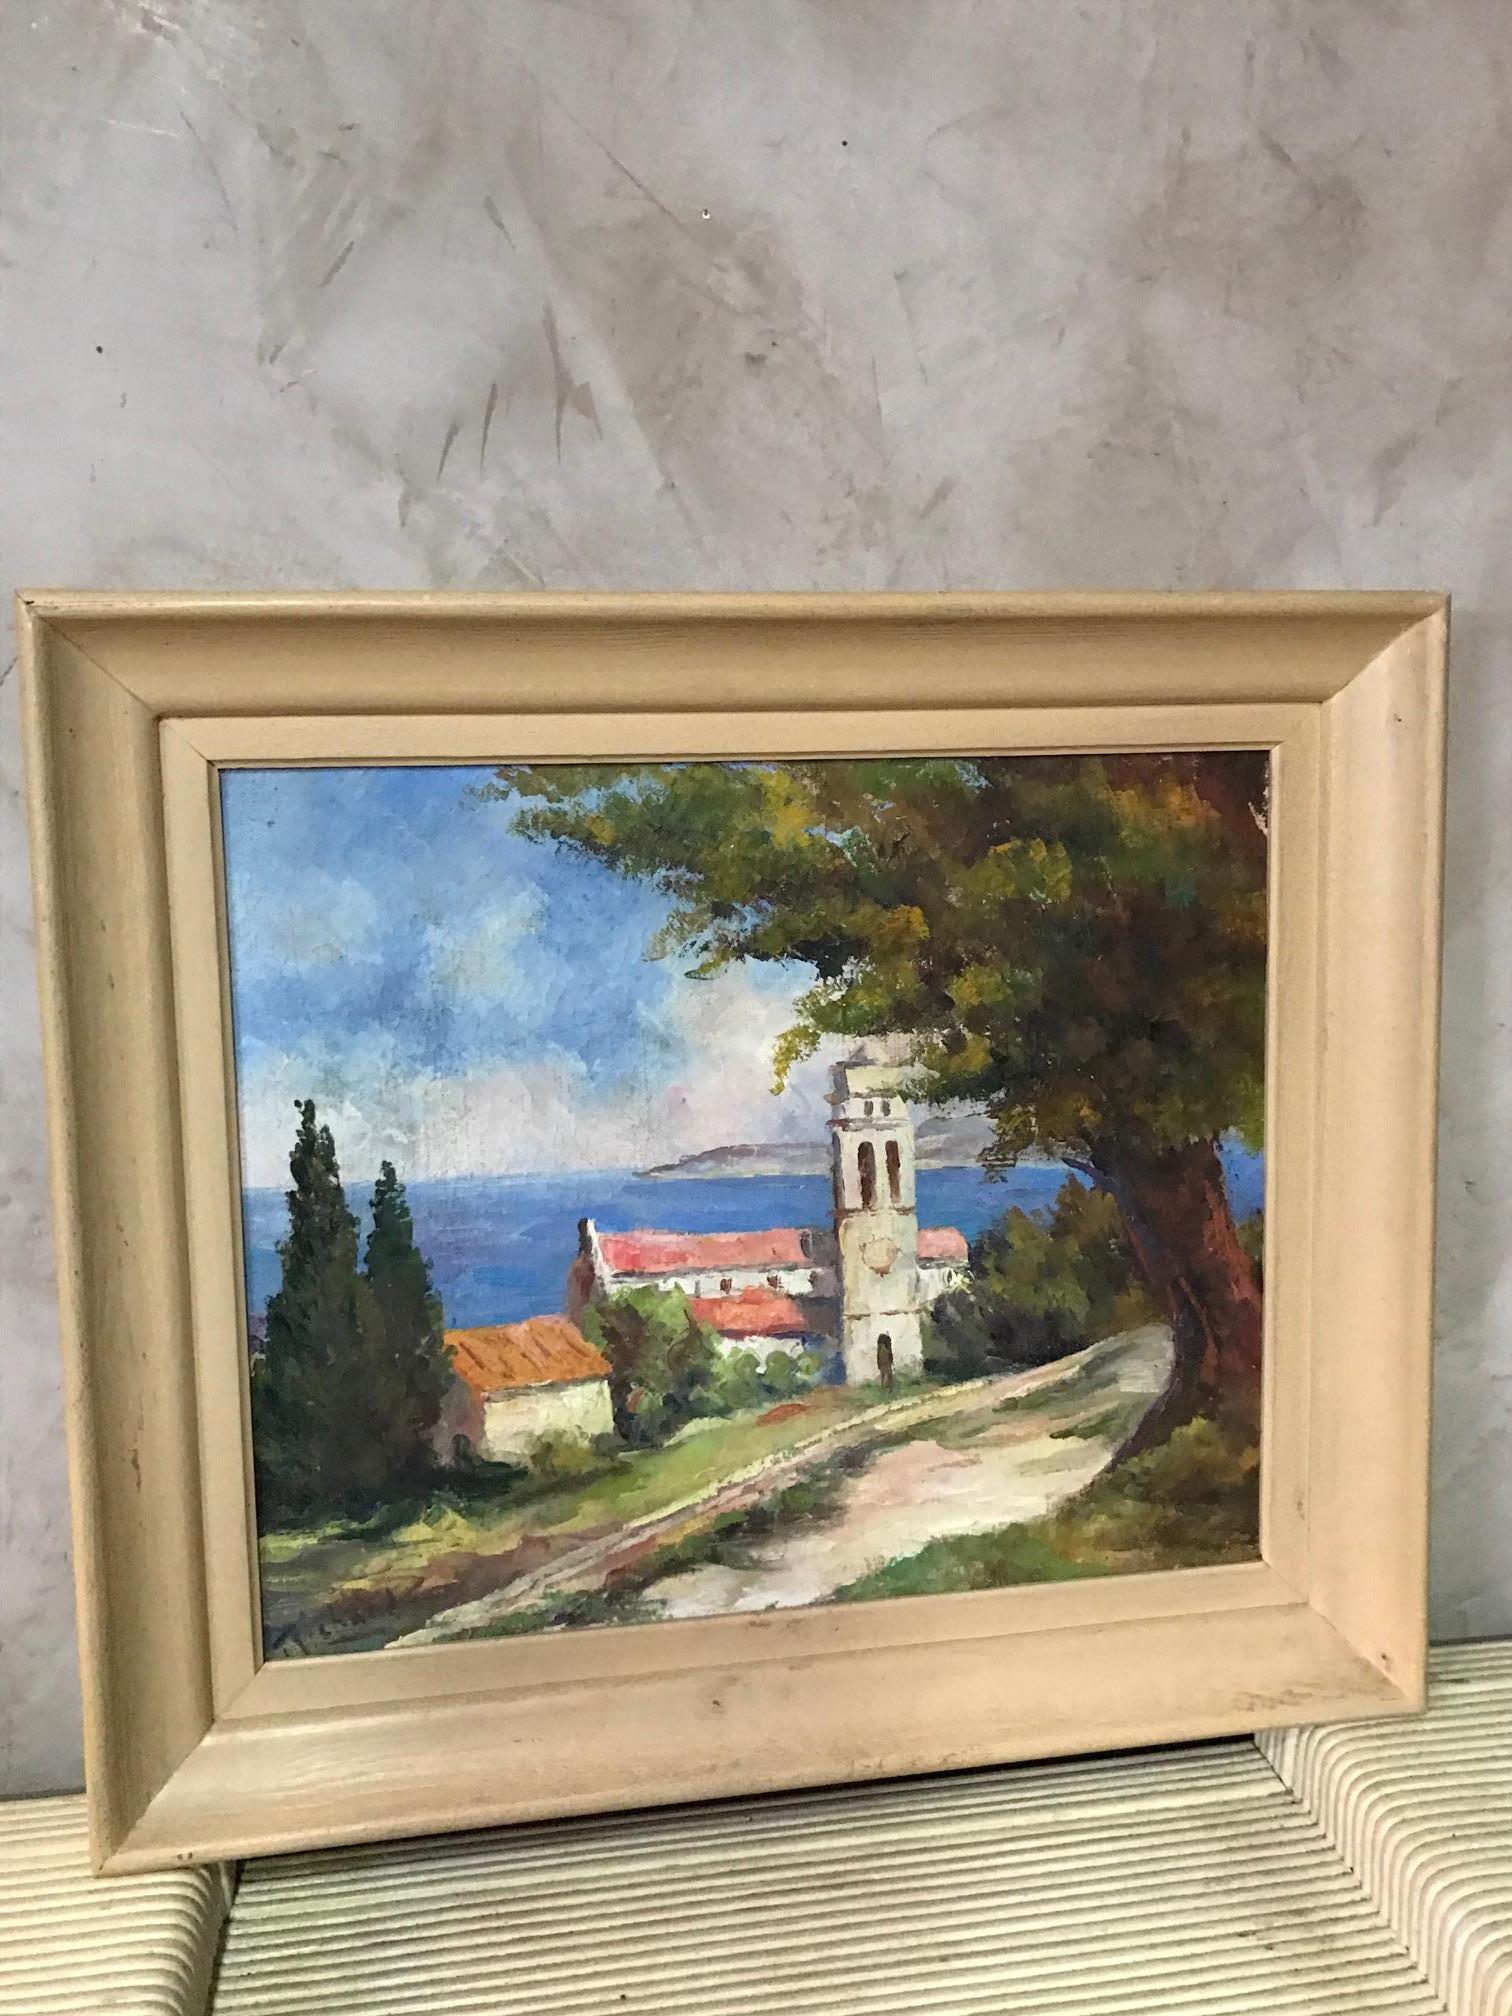 Very nice 20th century French seaside oil on canvas signed by Richard from the 1950s.
Representing Pino Church in Corsica (French island) by the sea.
Signed on the bottom right.
Very good condition.
Simple wood frame.